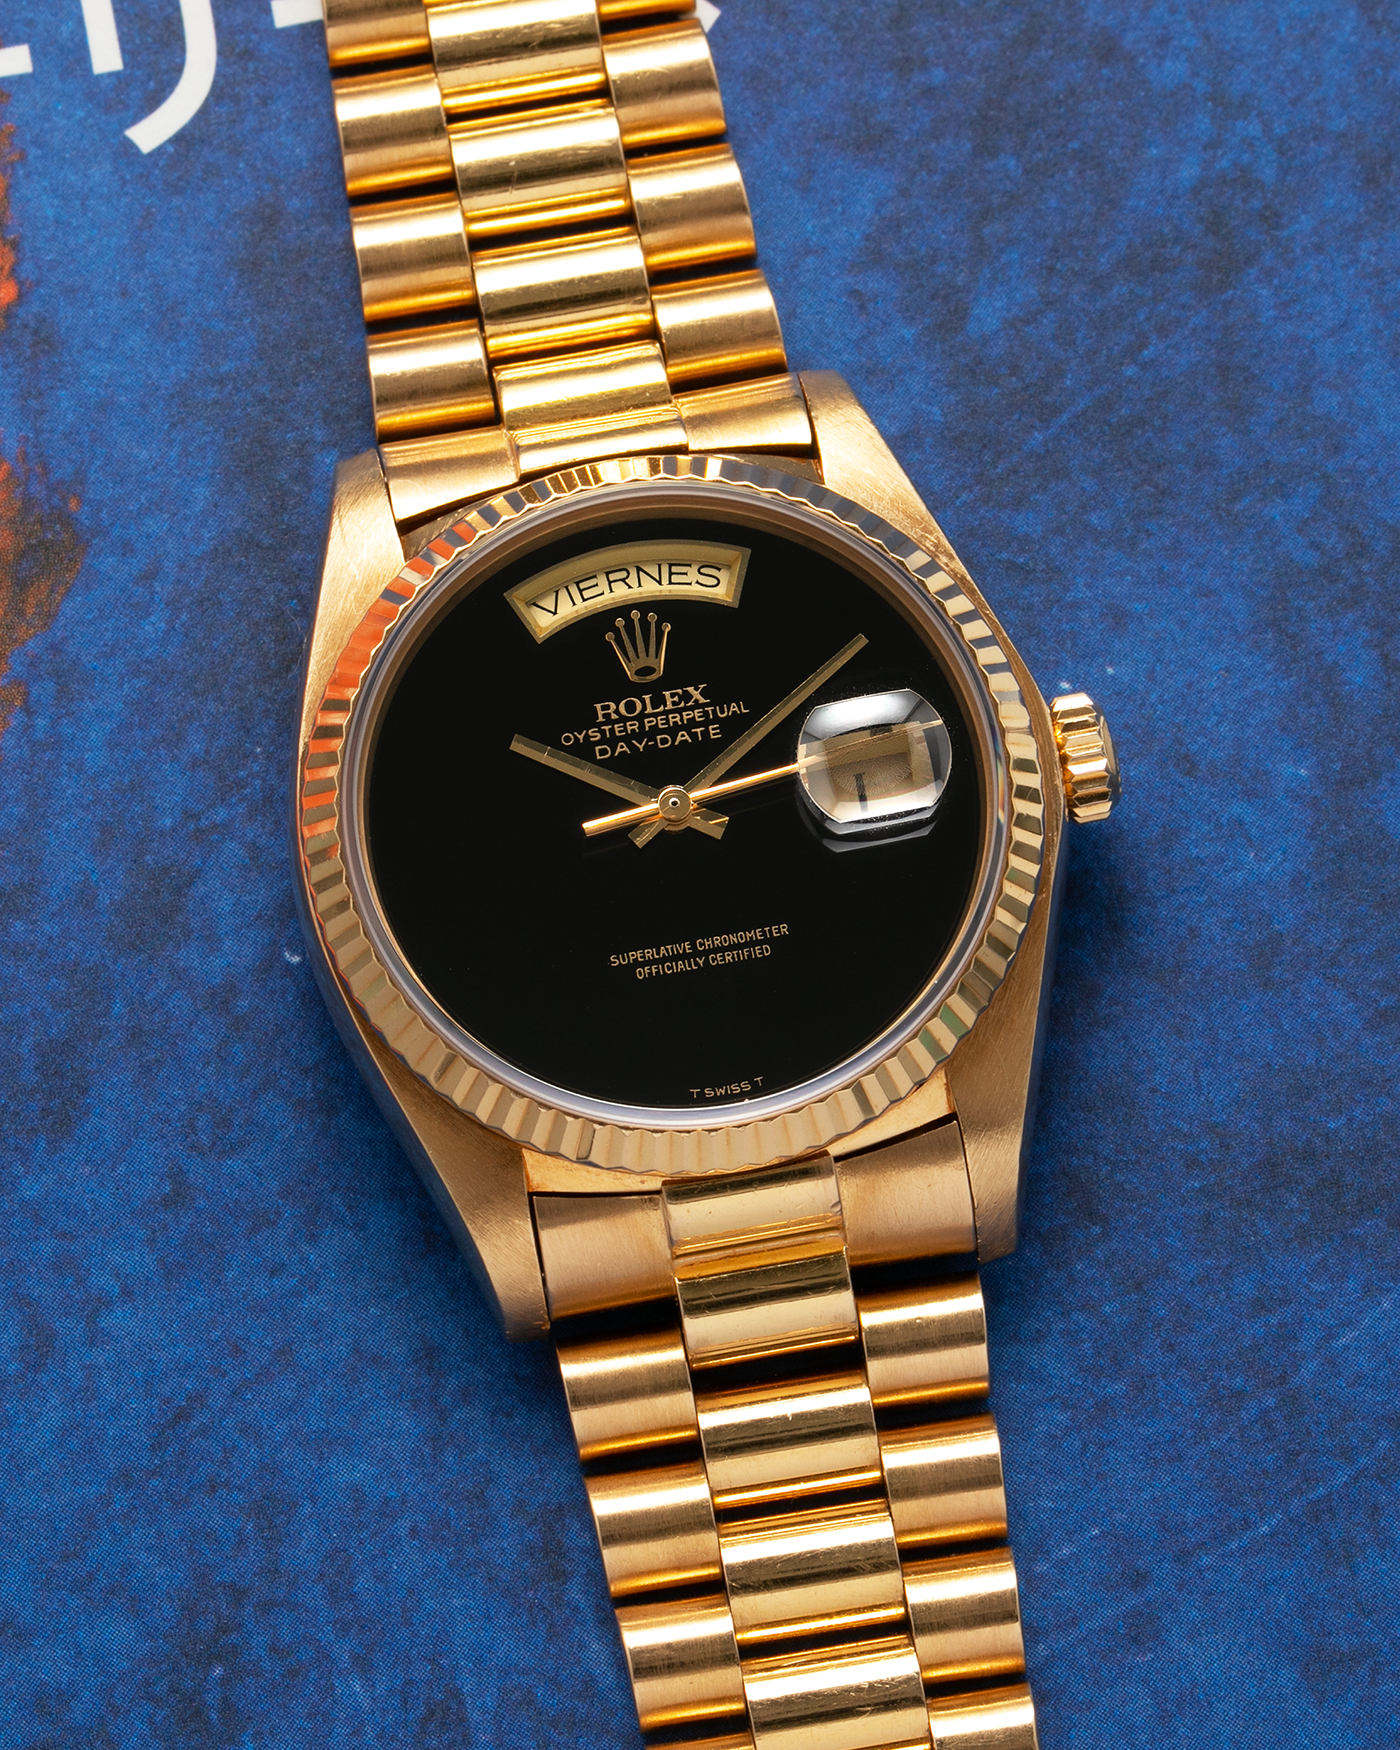 Brand: Rolex Year: 1979 Model: Day-Date, ‘Onyx’ Reference Number: 18038 Serial: 625XXXX Material: 18-carat Yellow Gold, Black Onyx Dial Movement: Rolex Cal. 3055, Self-Winding Case Diameter: 36mm Lug Width: 20mm Bracelet: Rolex ‘8385’ 18-carat Yellow Gold Presidential Bracelet with ‘55’ Curved End Links